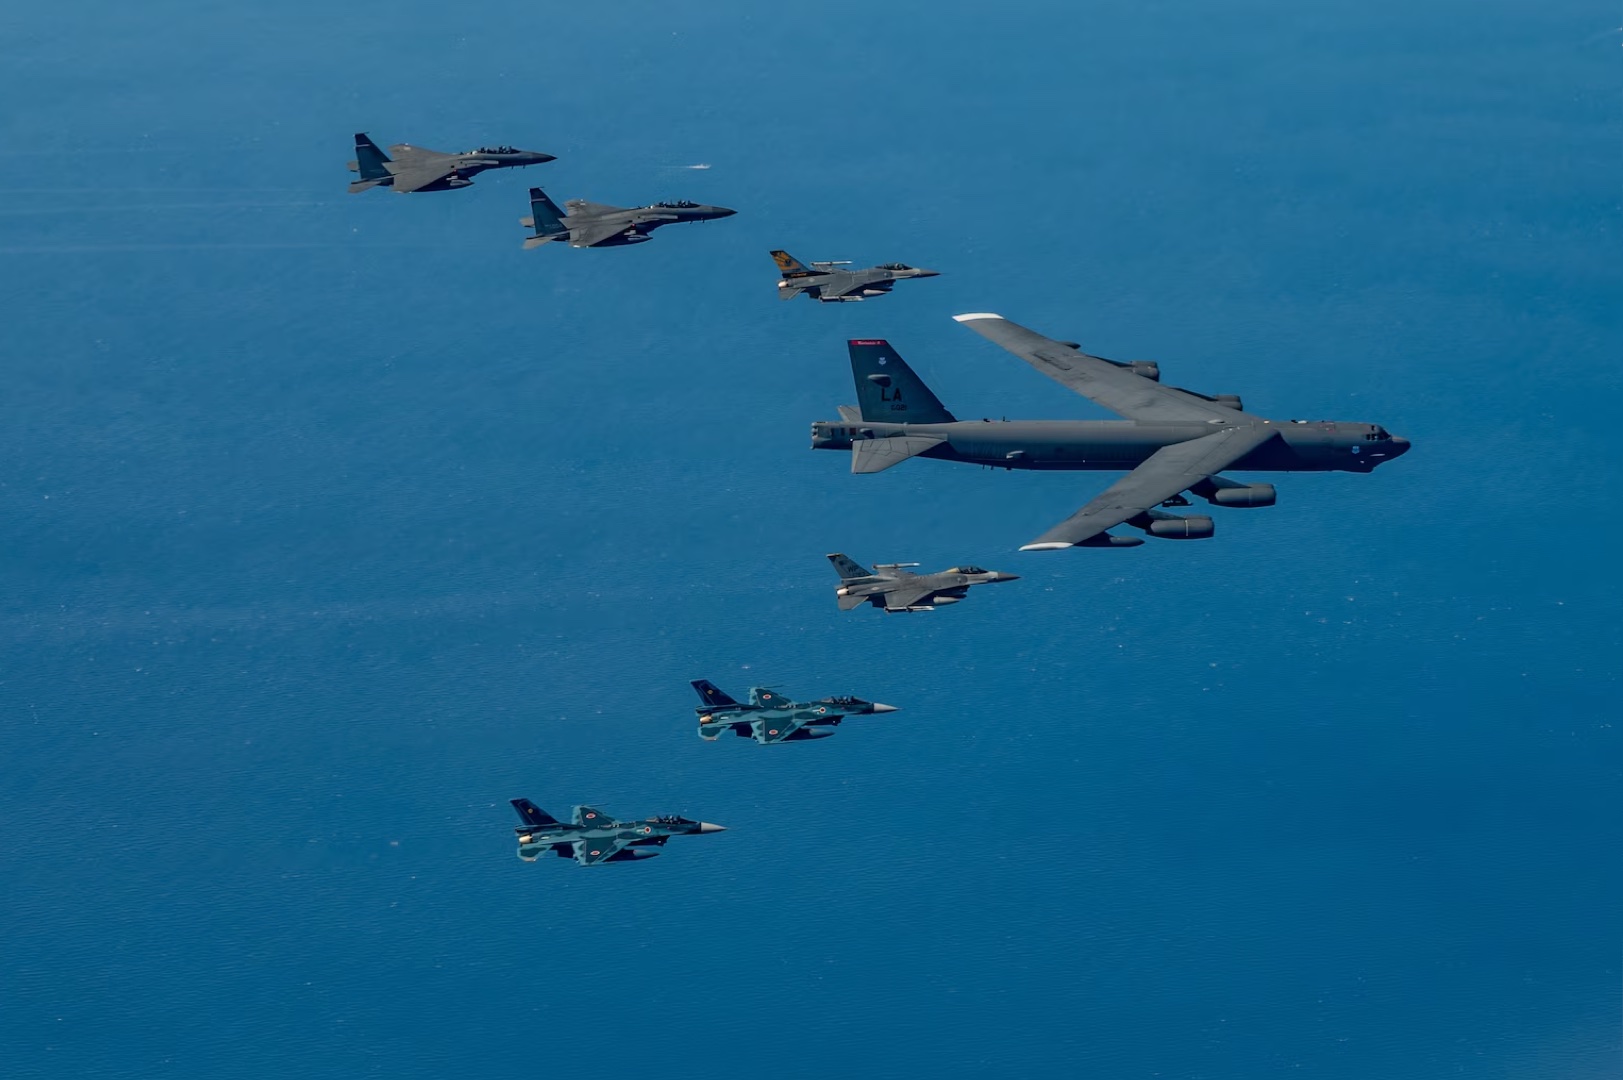 INDOPACOM: Chinese Fighter Comes 10 Feet from B-52 in ‘Unsafe’ Nighttime Intercept